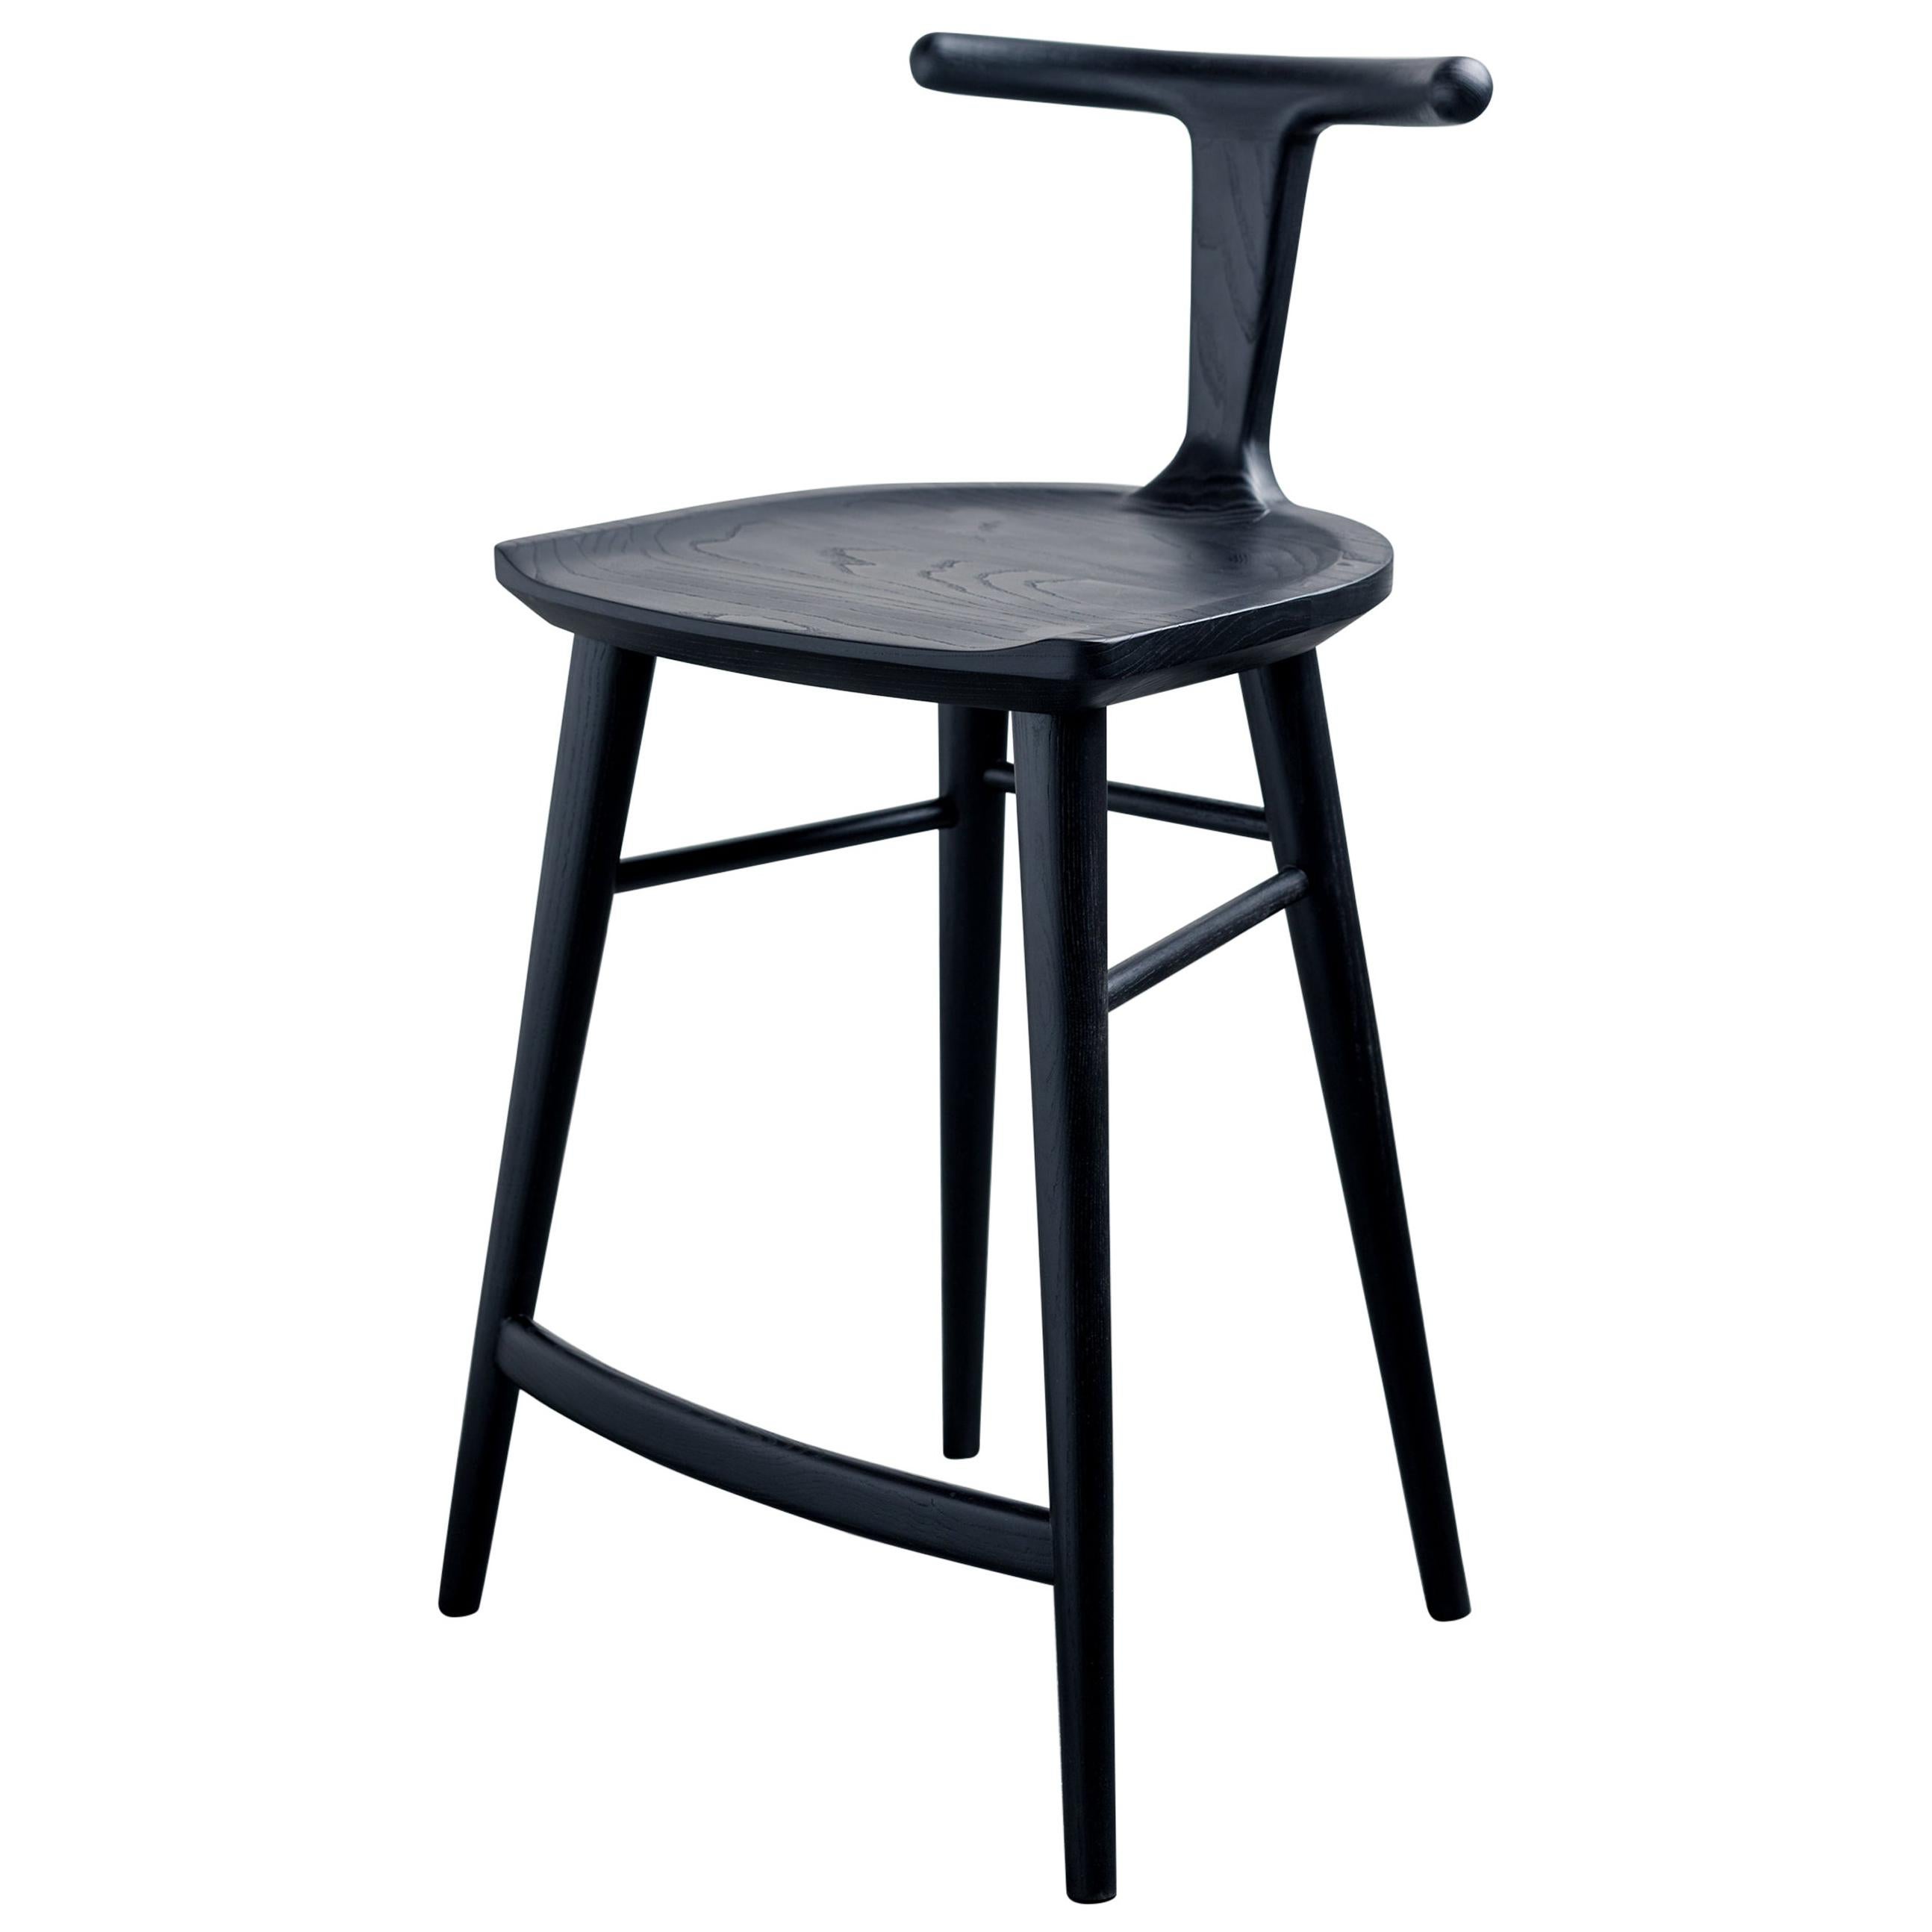 Oxbend Stool, Bar or Counter Seat in Black Charcoal Ashwood For Sale